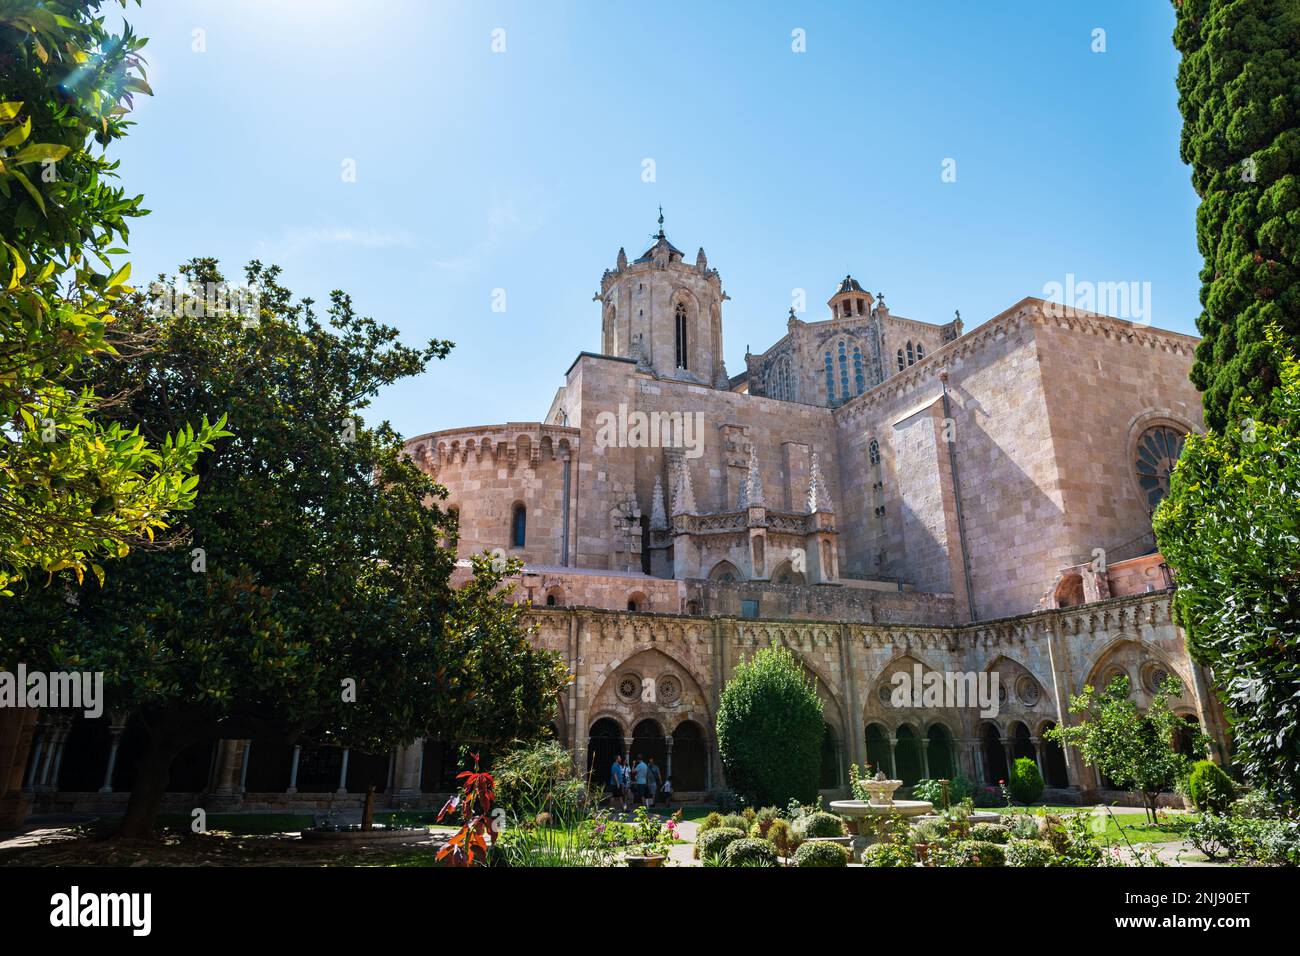 TARRAGONA, SPAIN - AUGUST 6, 2022: Cloister of the Cathedral of Tarragona, a Roman Catholic Church built in early-12th-century in Romanesque architect Stock Photo